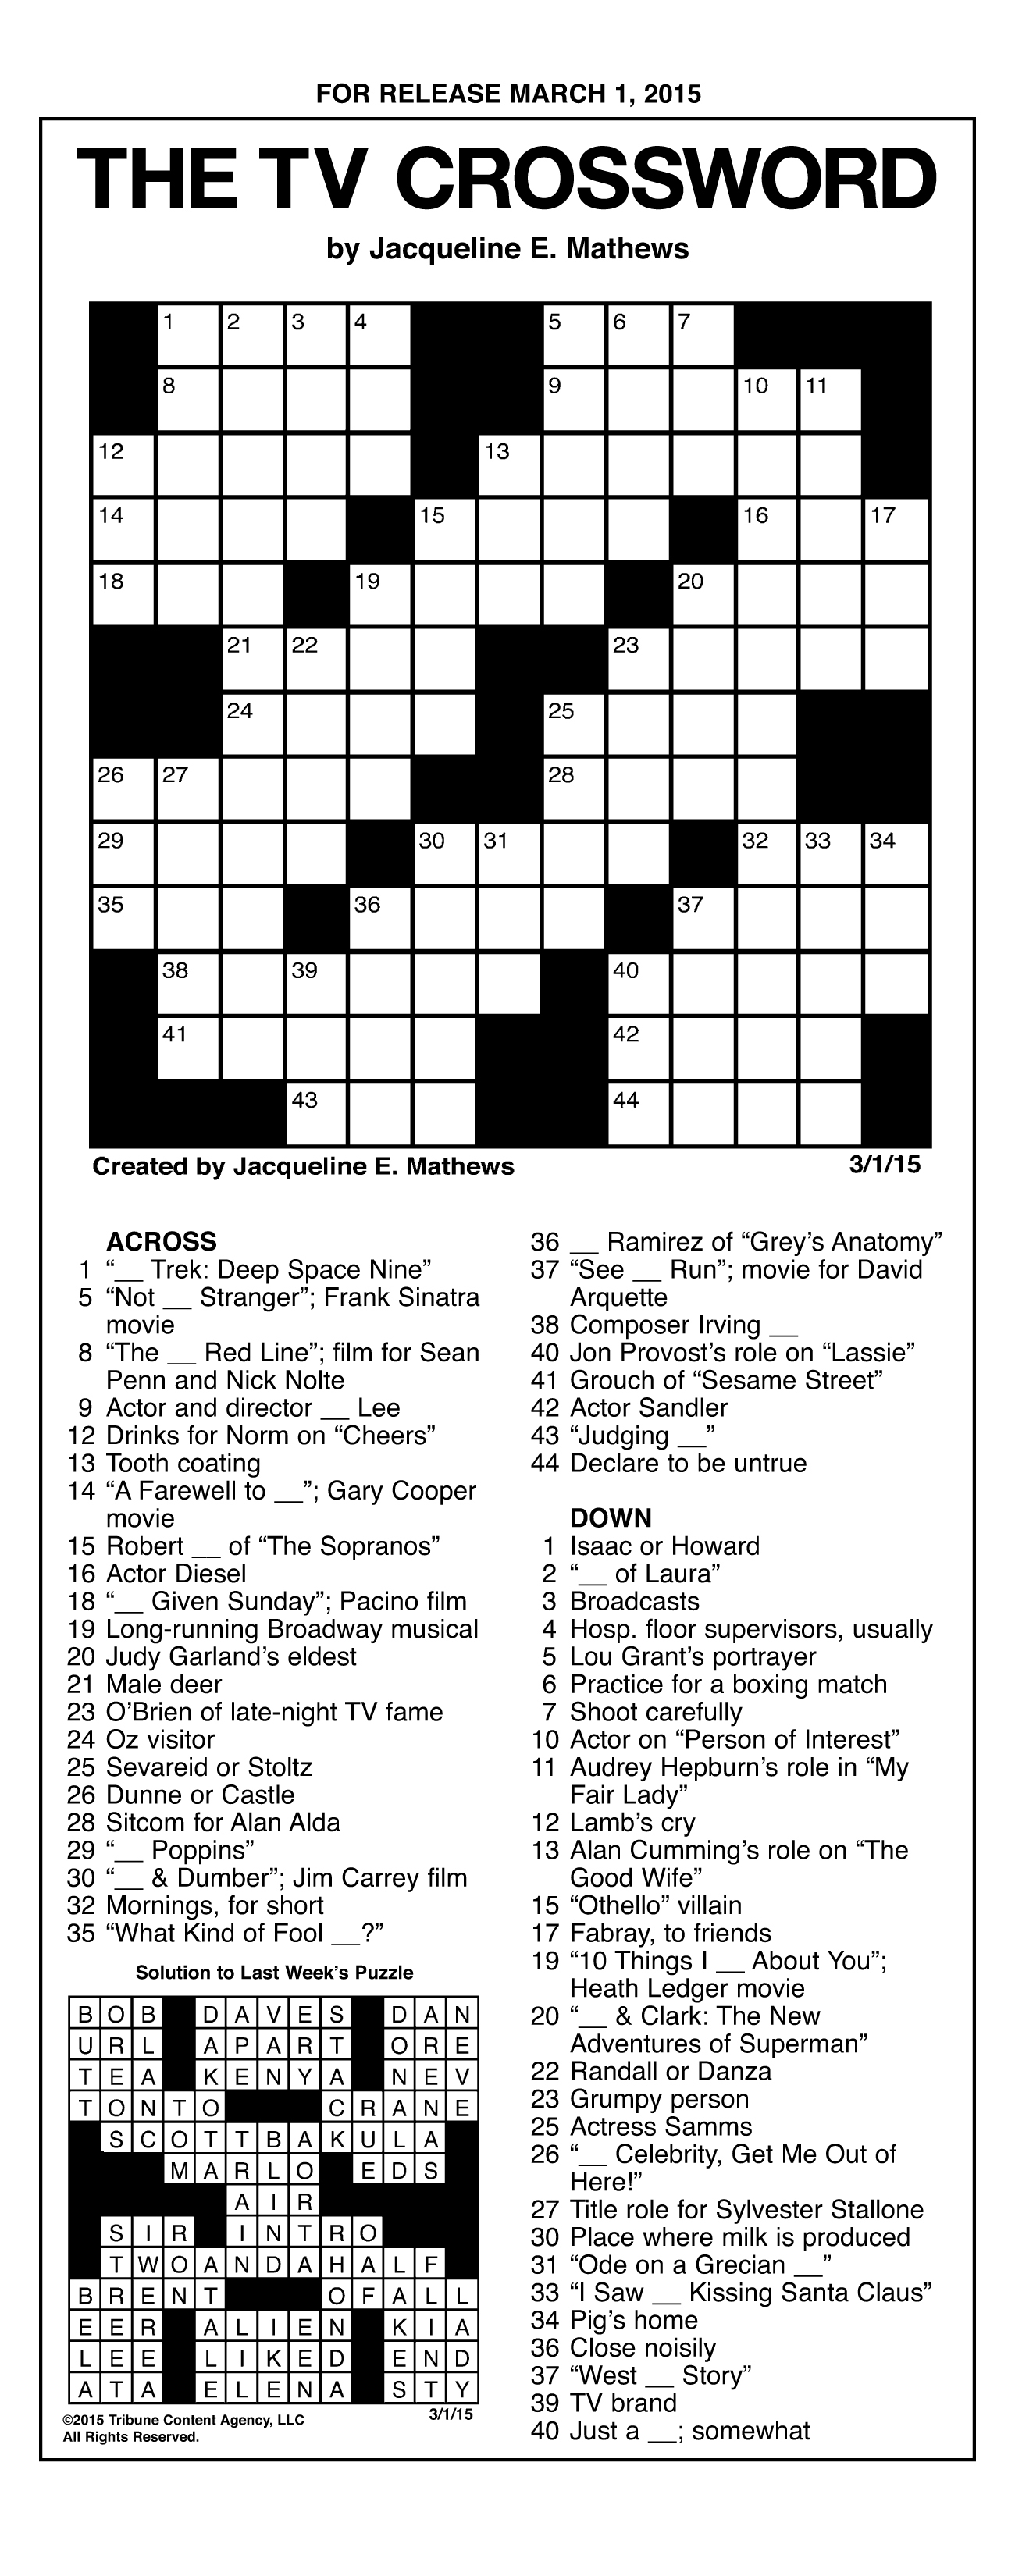 Sample Of The Tv Crossword | Tribune Content Agency (March 1, 2015) - Printable Crossword Puzzles By Jacqueline Mathews